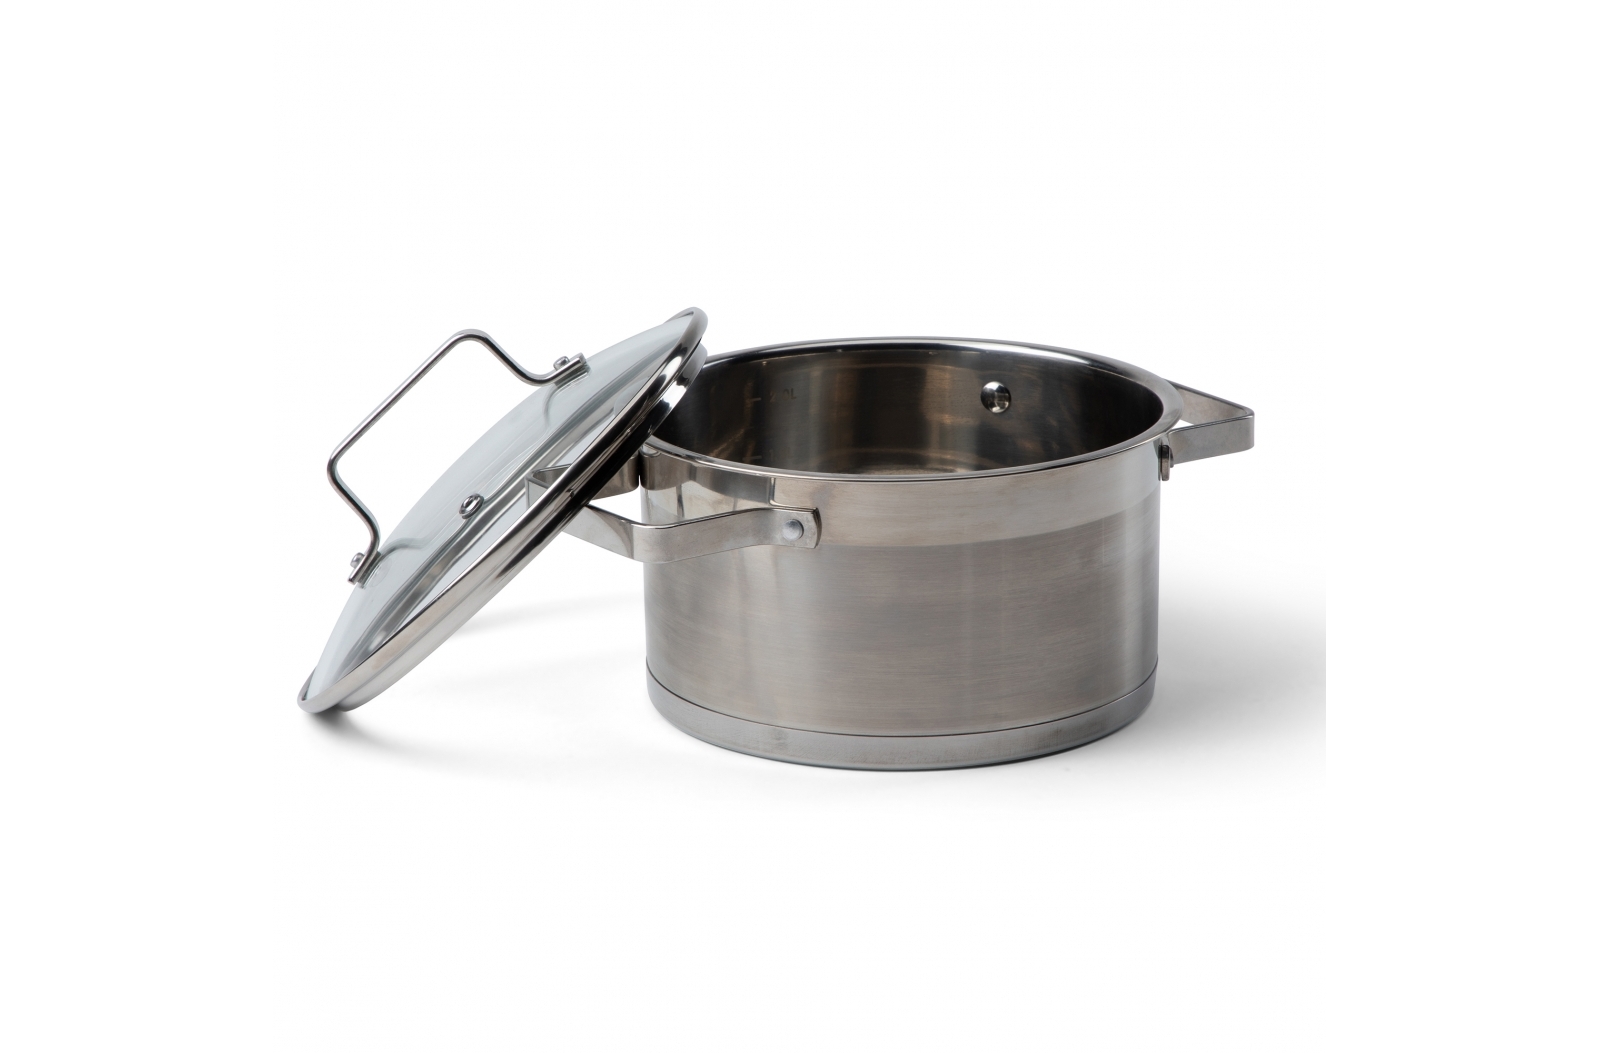 This Orrefors Jernverk cooking pot from Chittlehamholt is made of 2.5 liters of stainless steel. - Ollerton